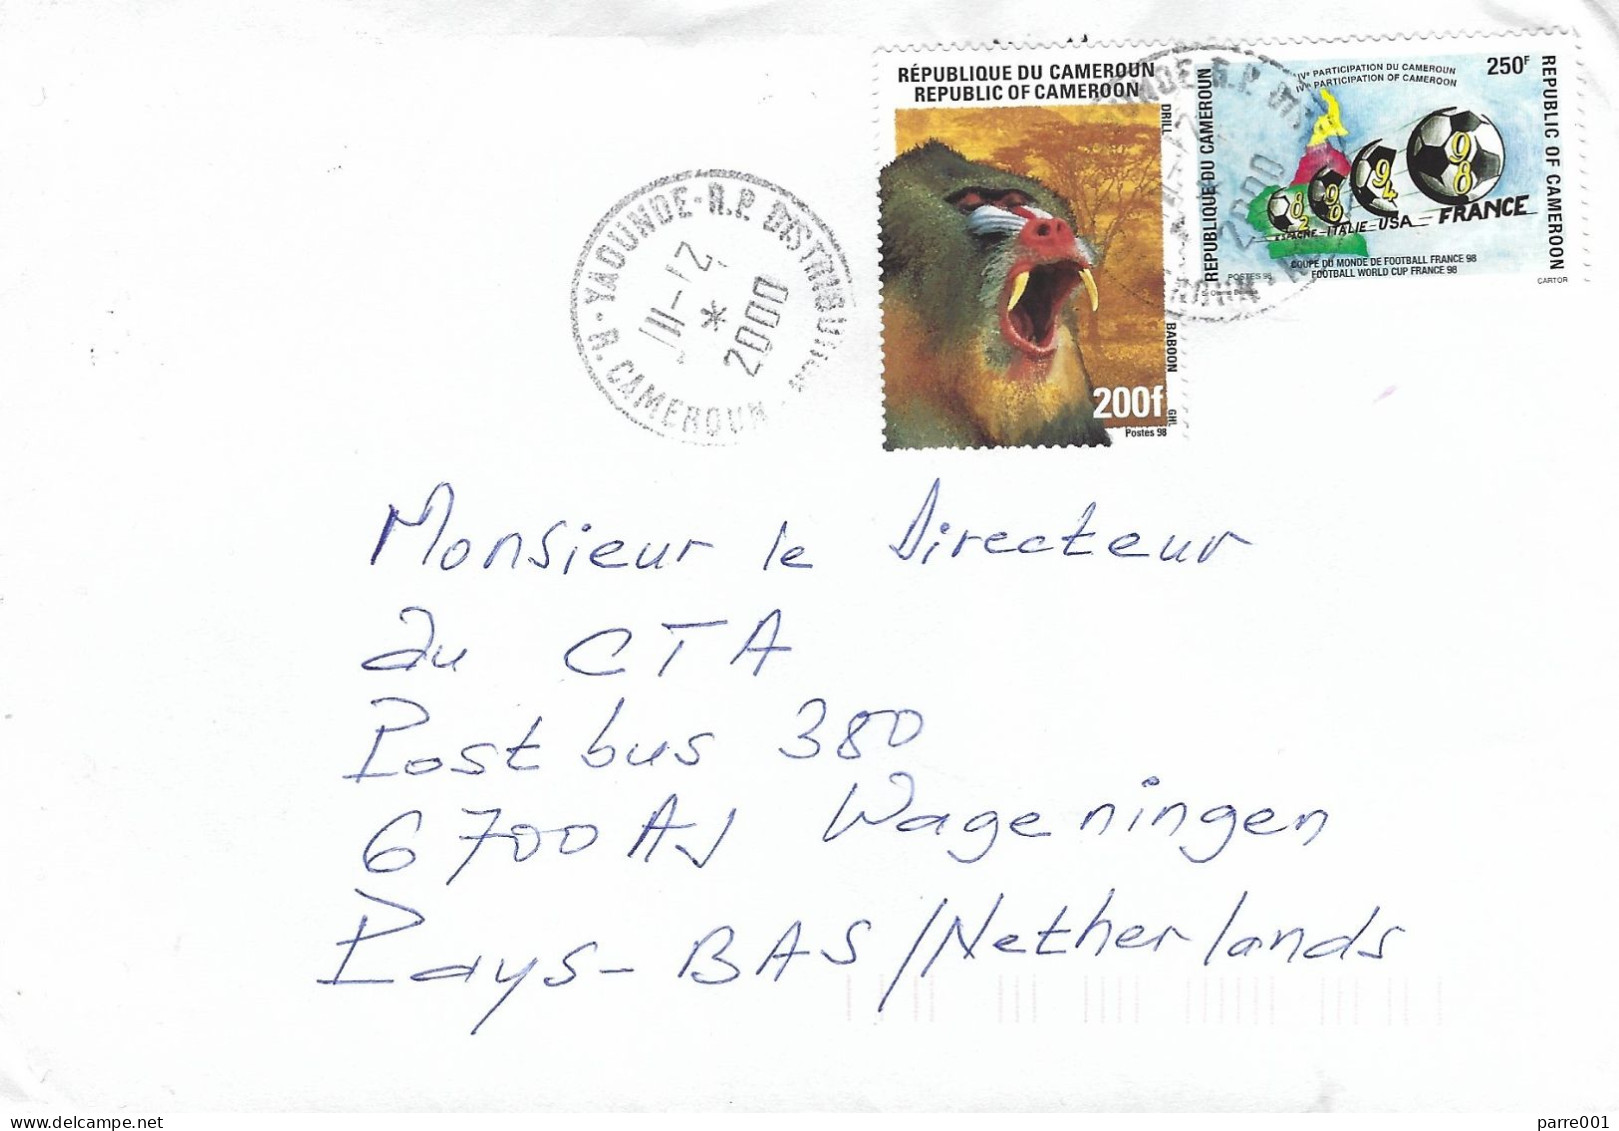 Cameroon Cameroun 2000 Yaounde World Cup Football France 250f Mandrill Monkey Cover - 1998 – Frankreich